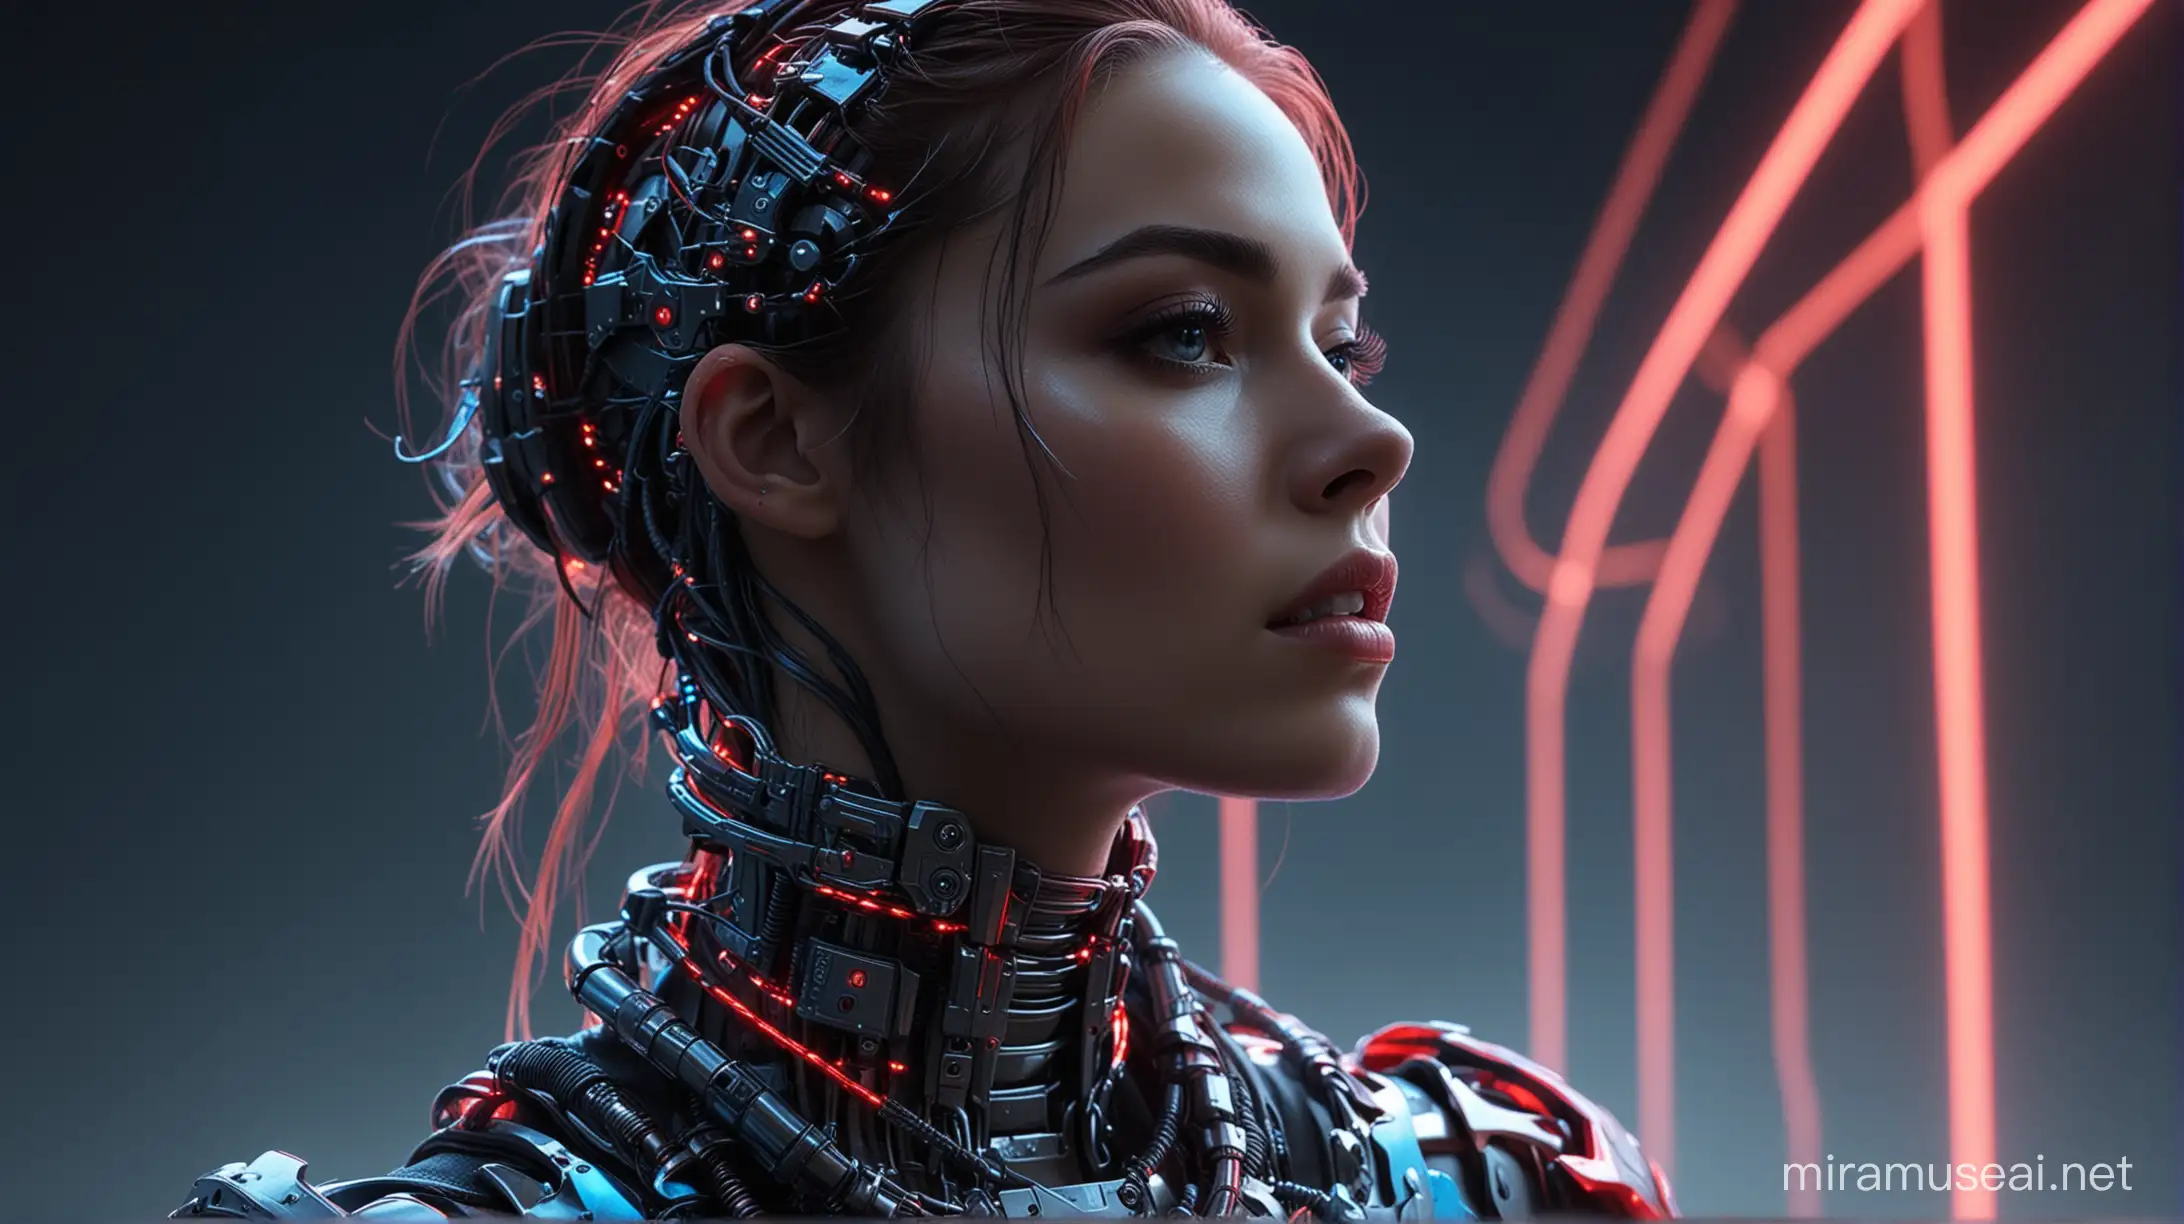 Cyborg Girl Gazing at Neon Sky Futuristic Portrait in Vibrant Red and Blue Lights